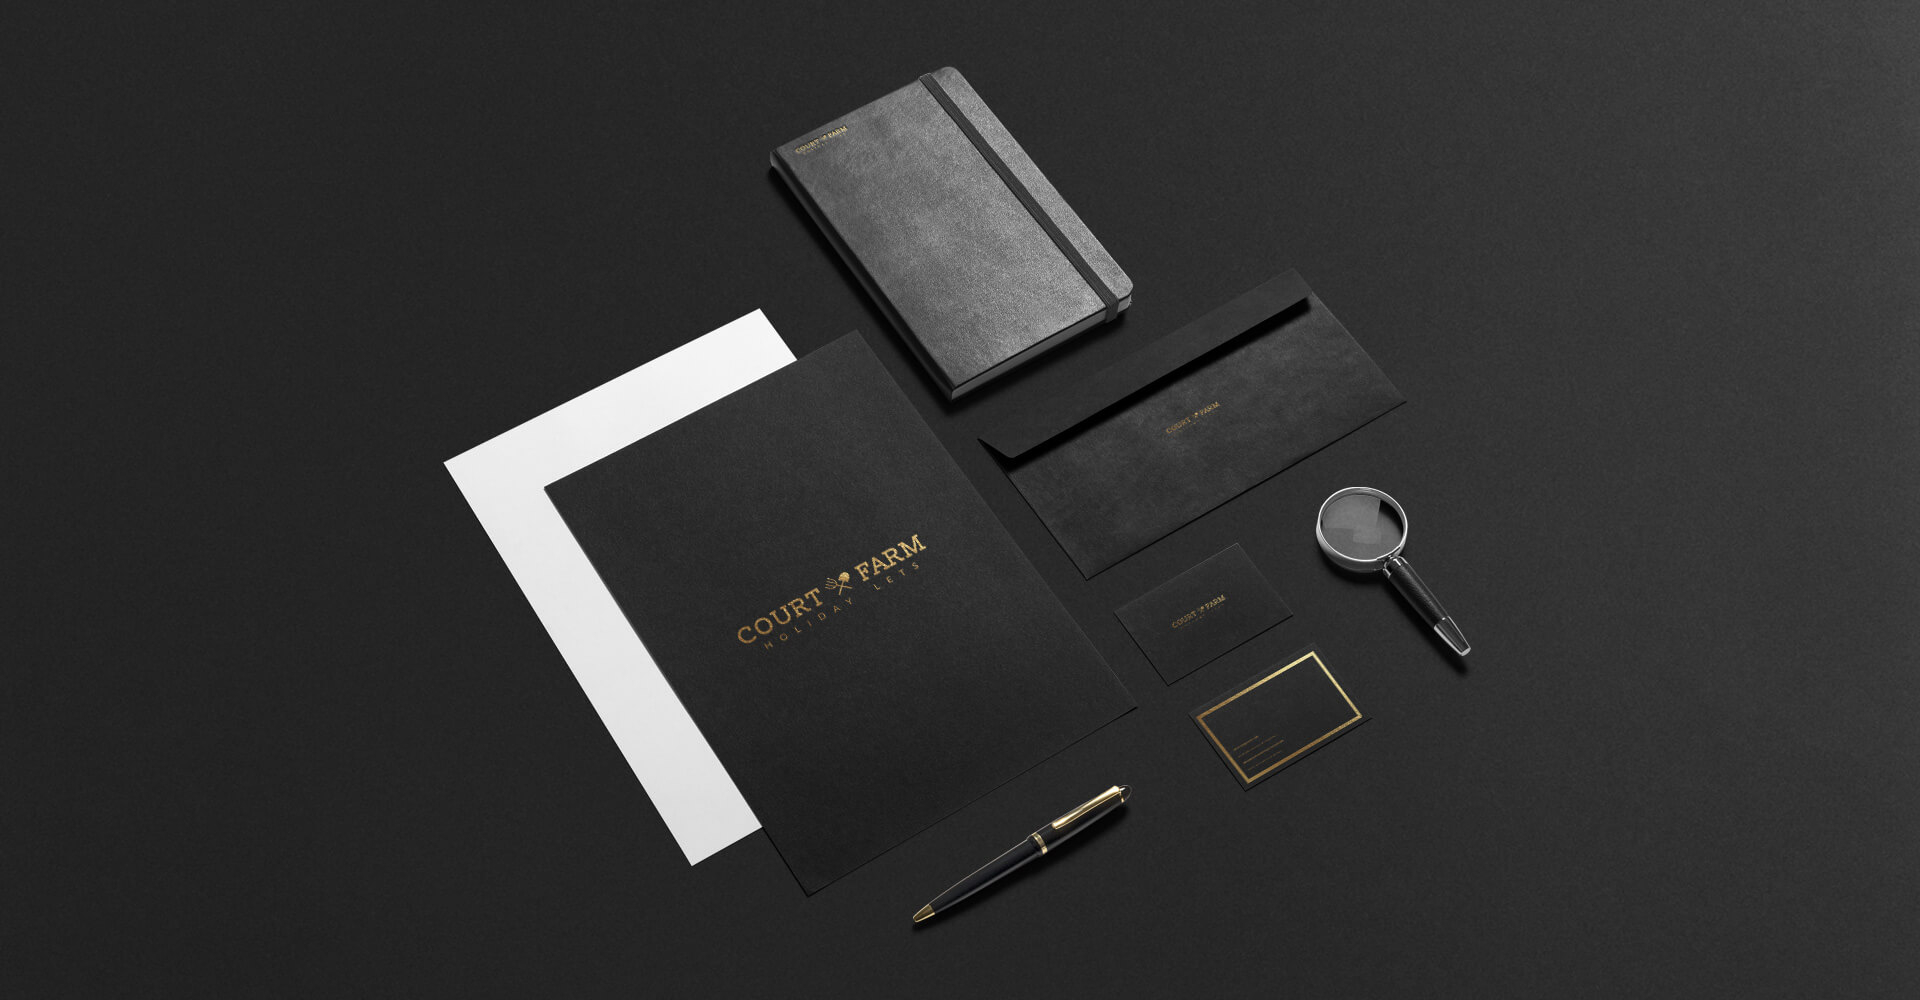 agricultural branding for court farm, in the form of a note pad, envelope, documents and a business card on a black surface